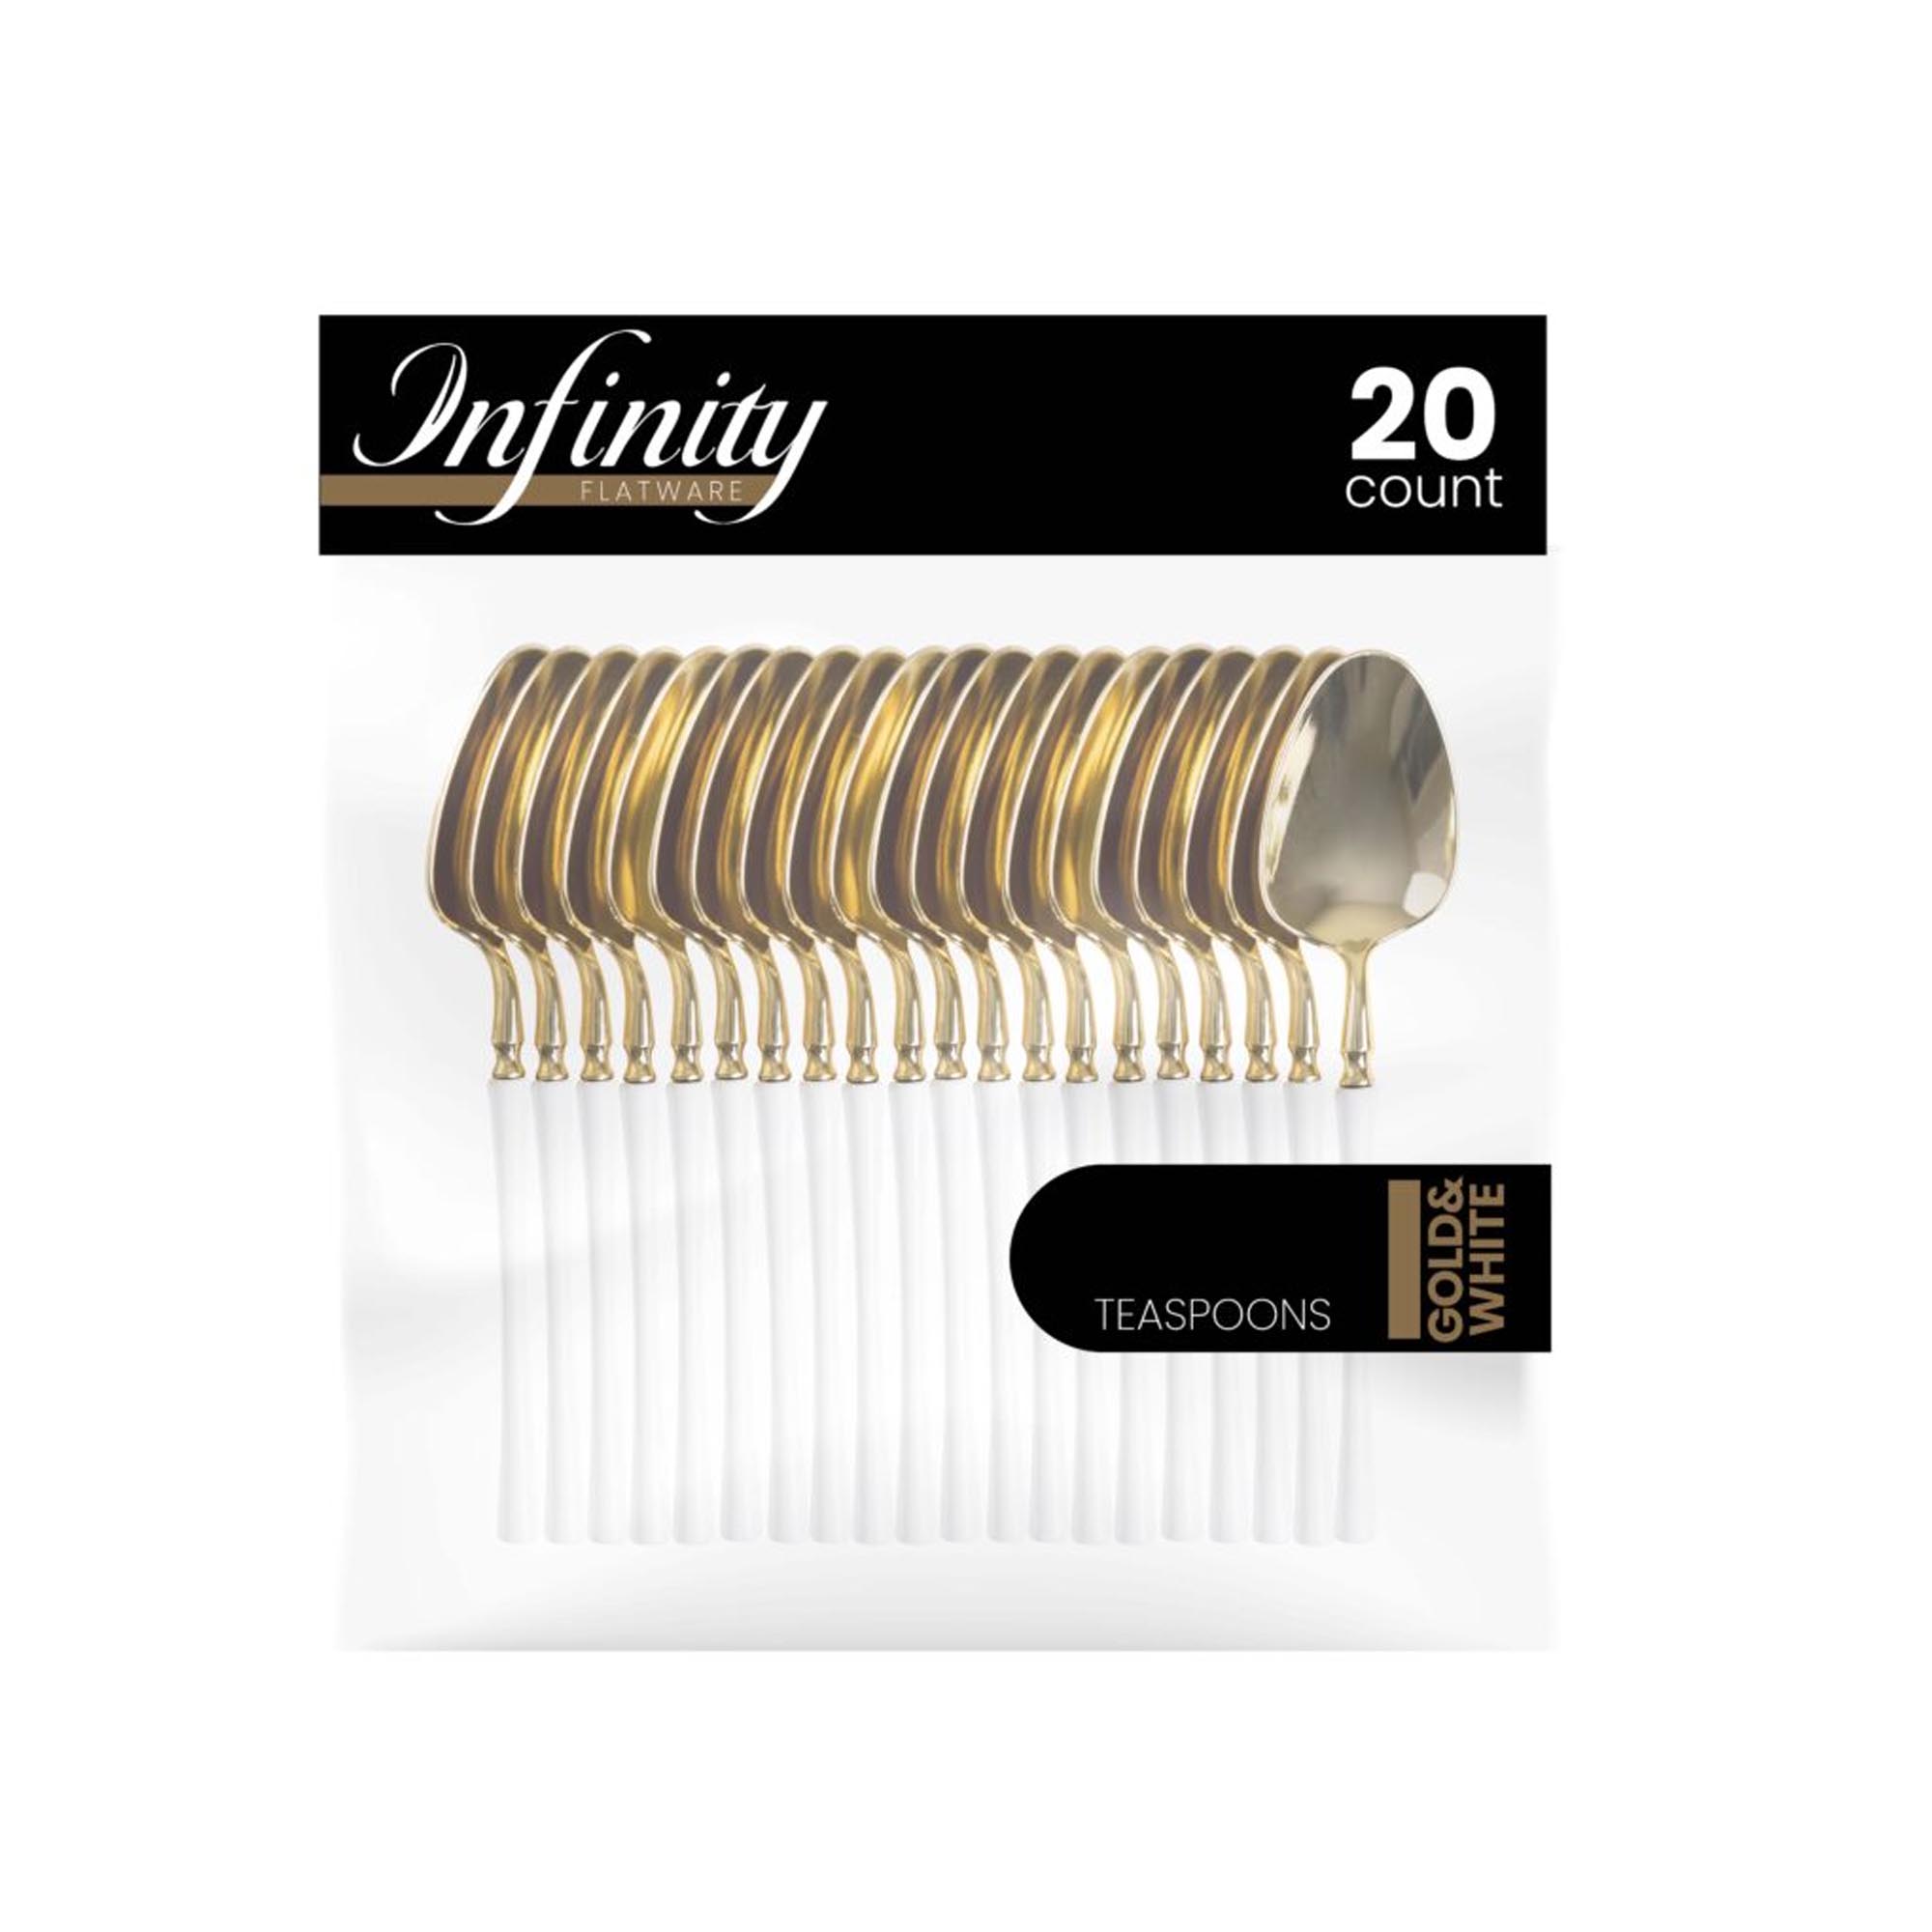 Plastic Tea Spoons White and Gold Infinity Flatware Collection